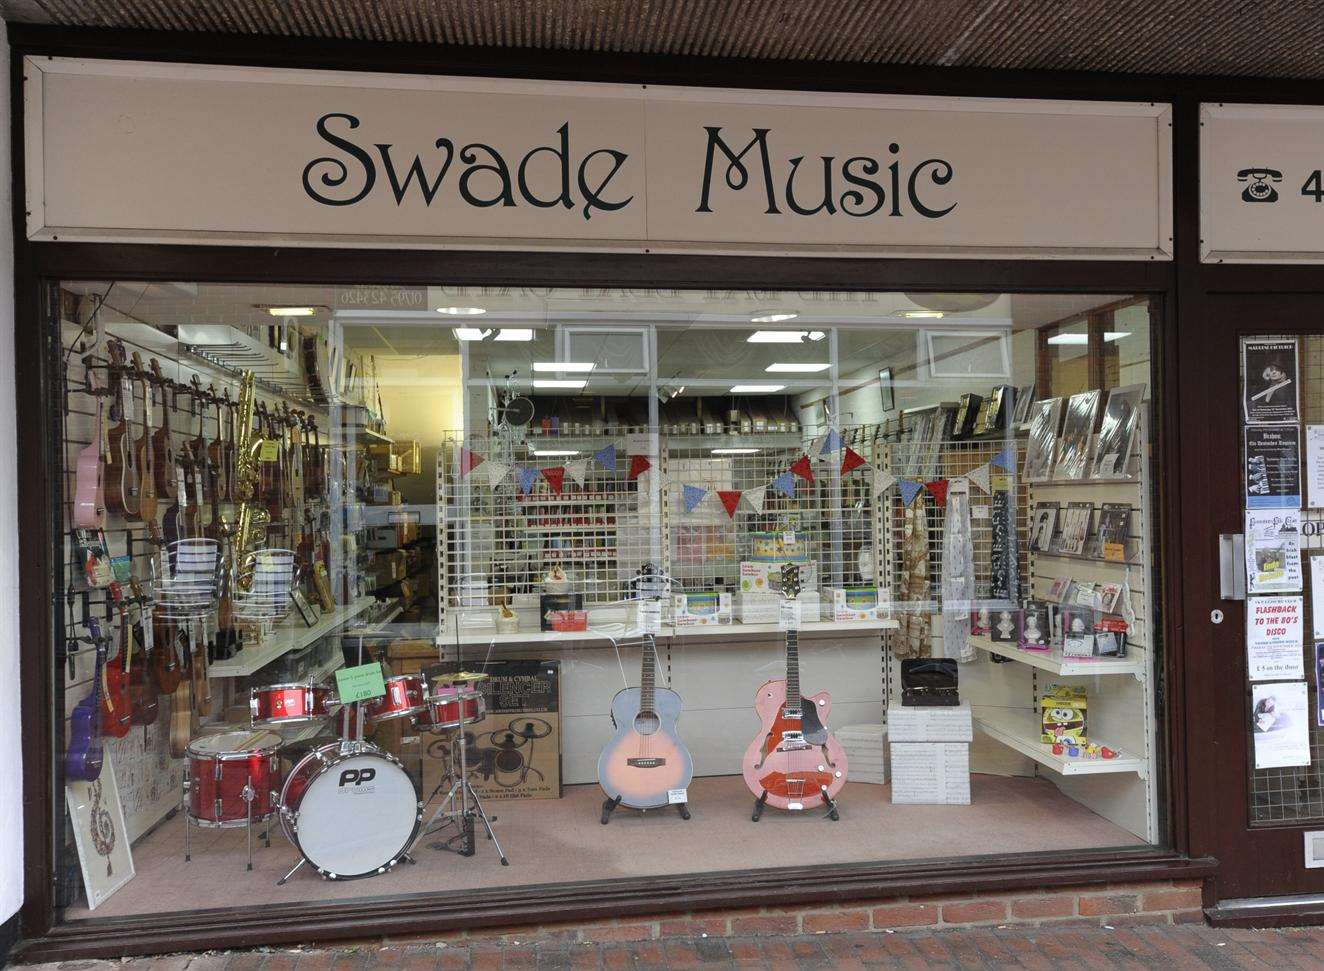 It's hoped the premises will continue to be a music shop